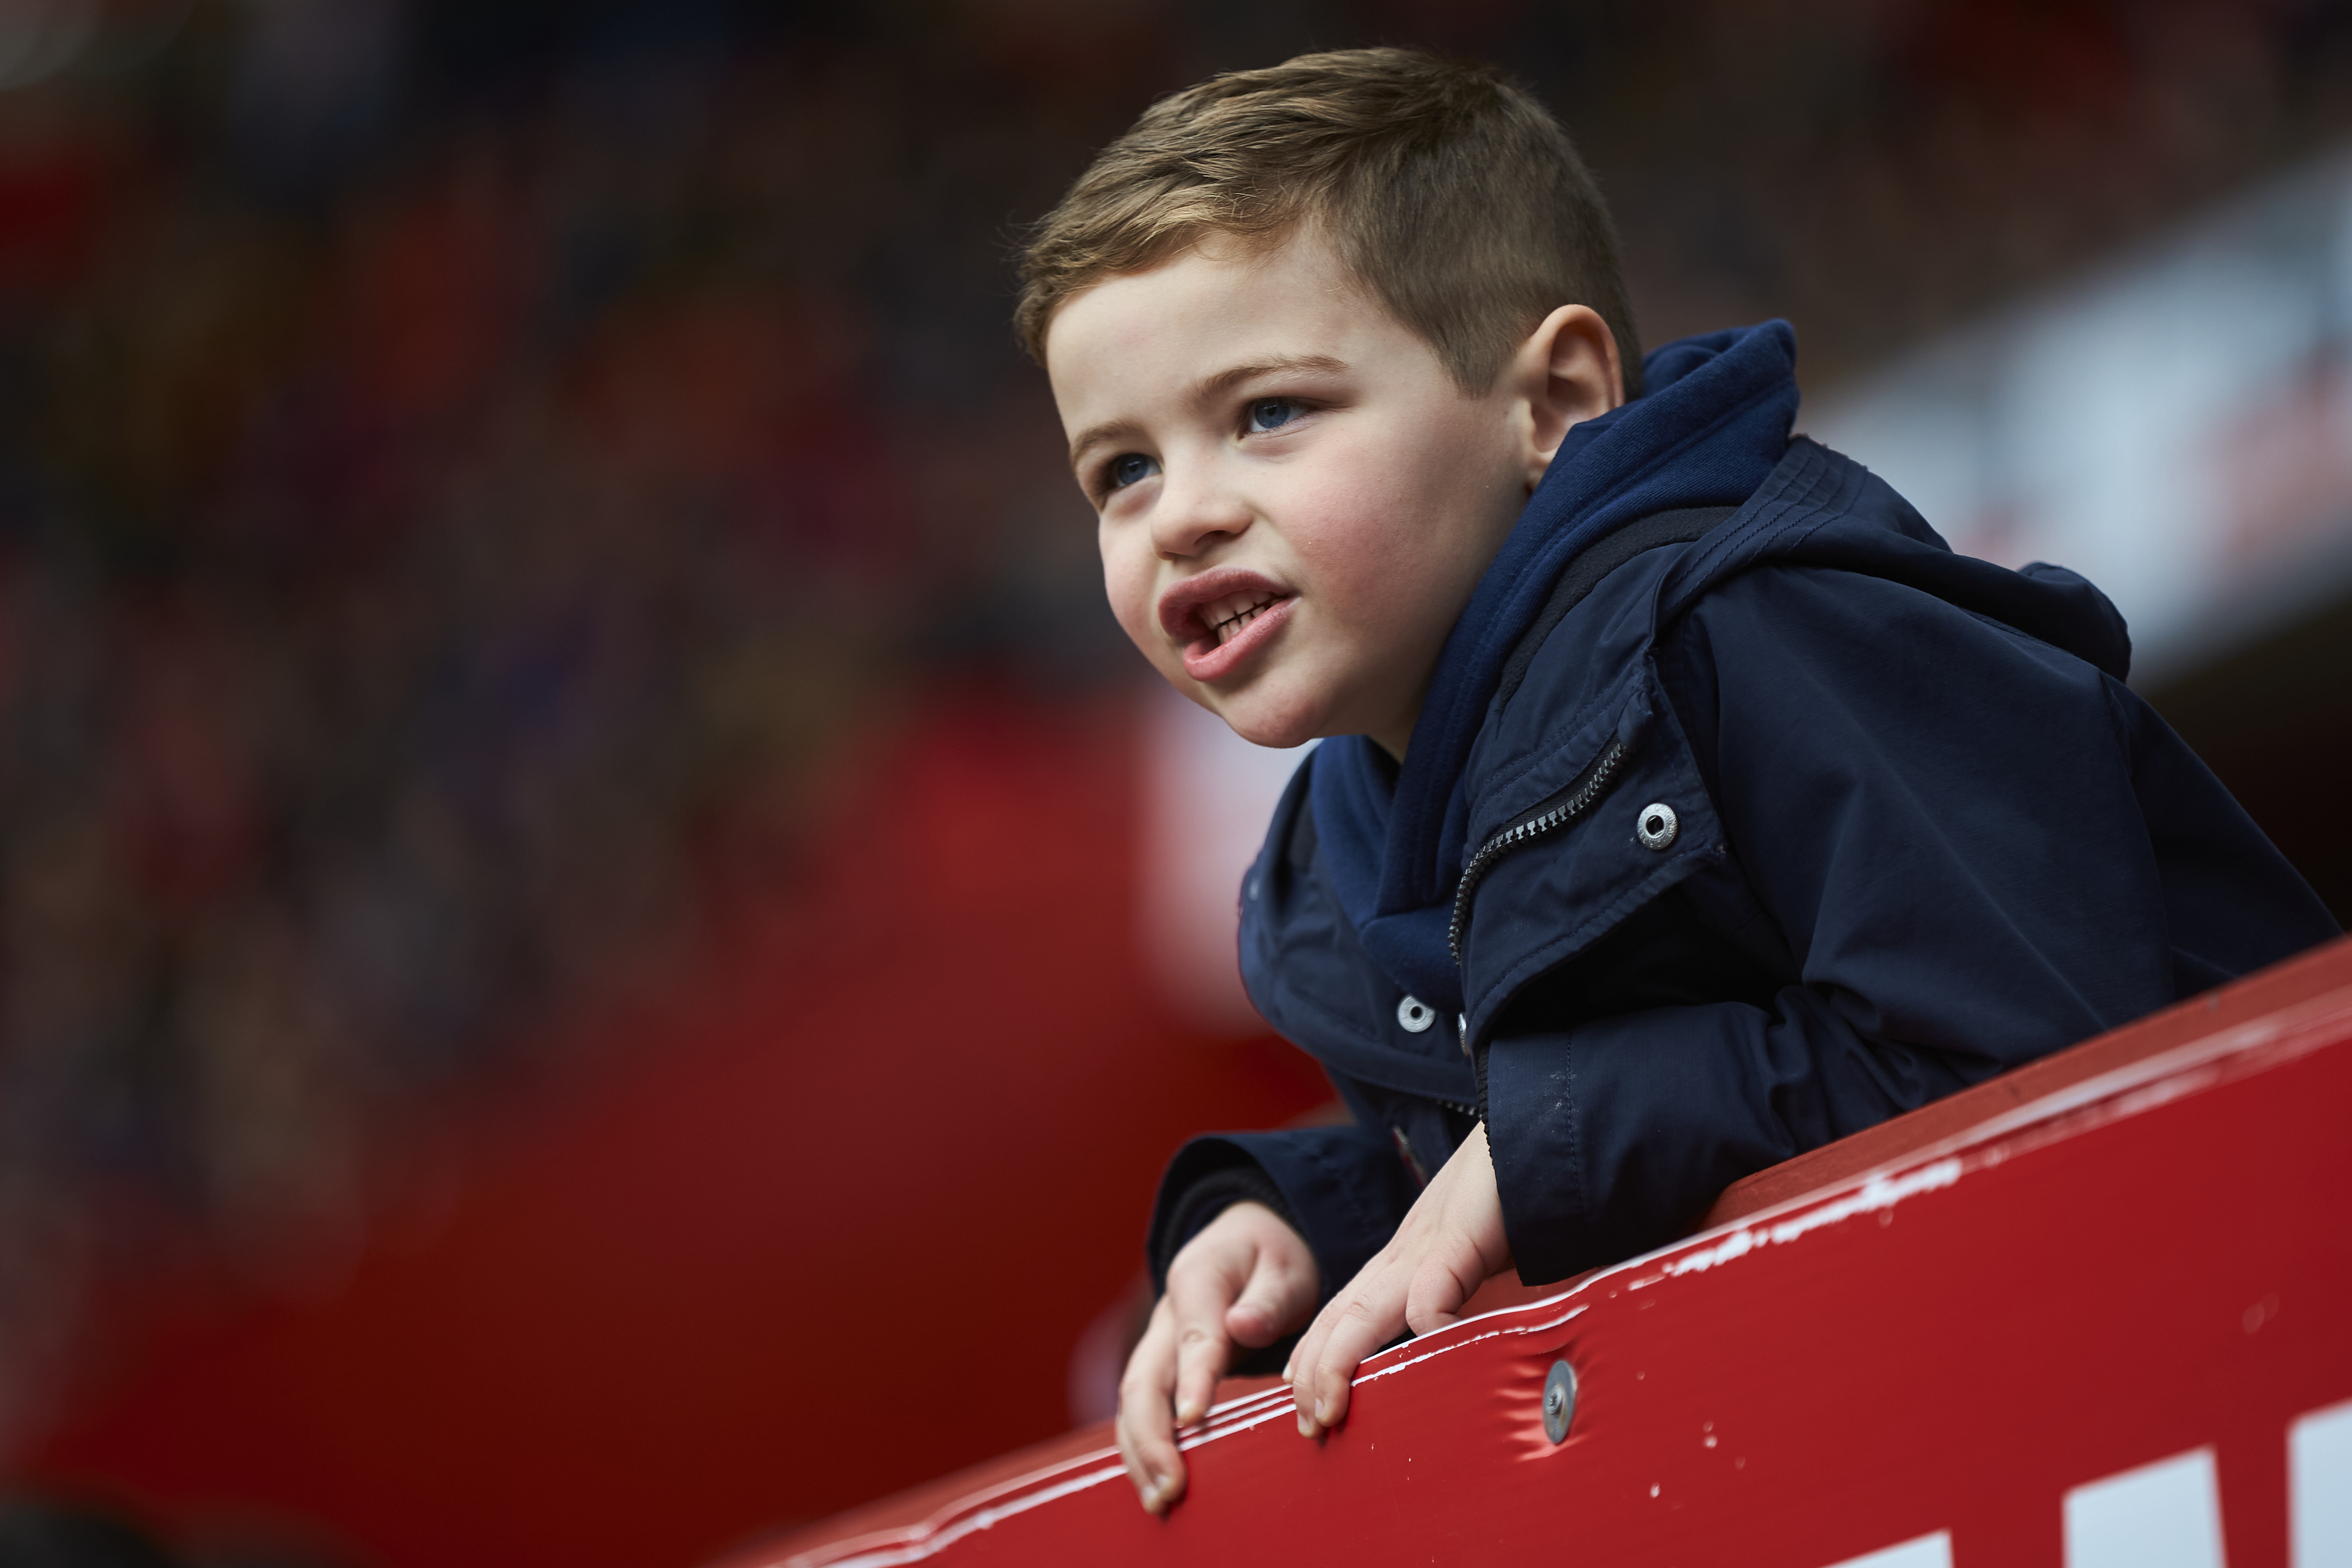 A young Charlton supporter cheers on from the stands